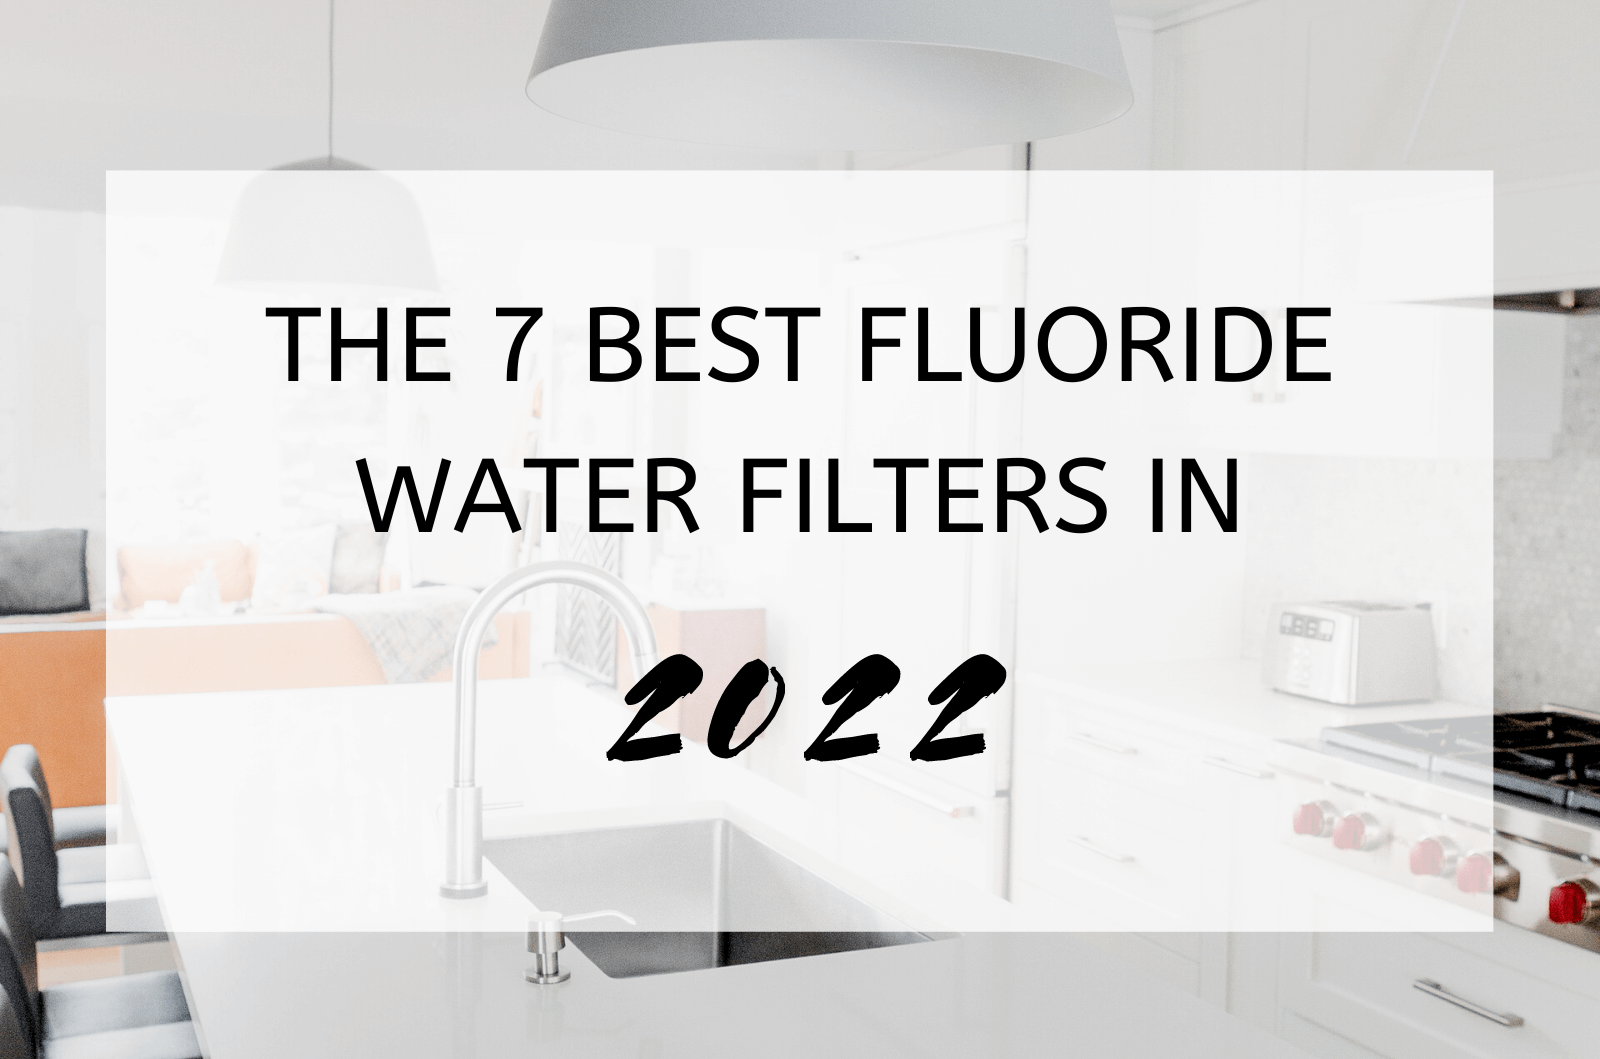 The 7 Best Fluoride Water Filters In 2022